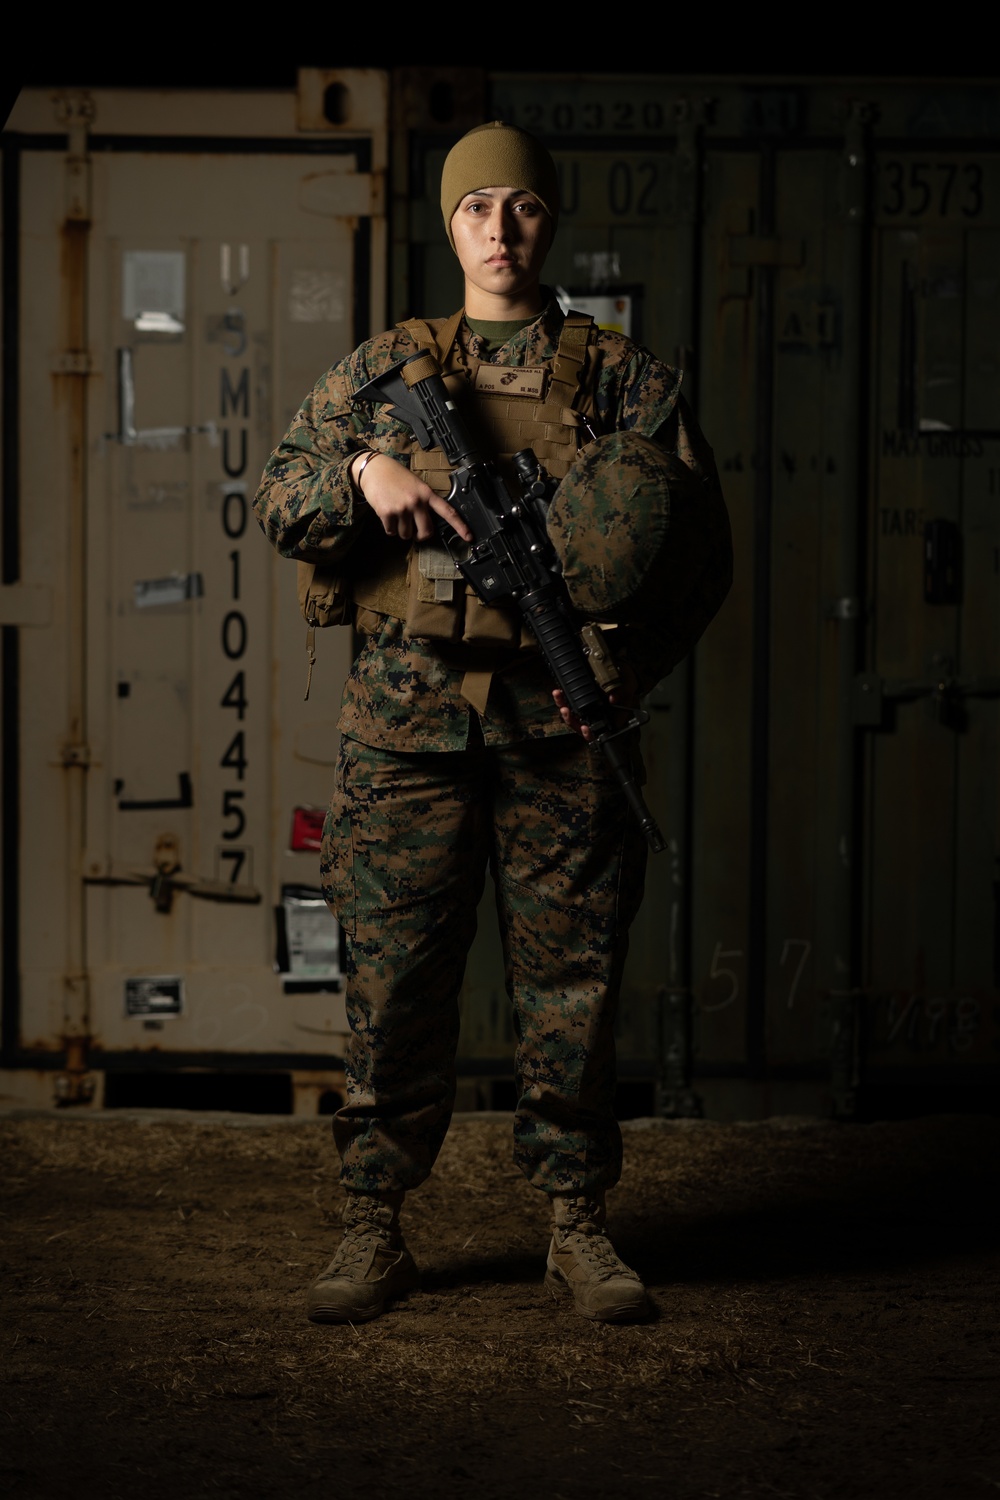 Still Breathing: III MSB Marine Returns to South Korea, Shares Lessons Learned